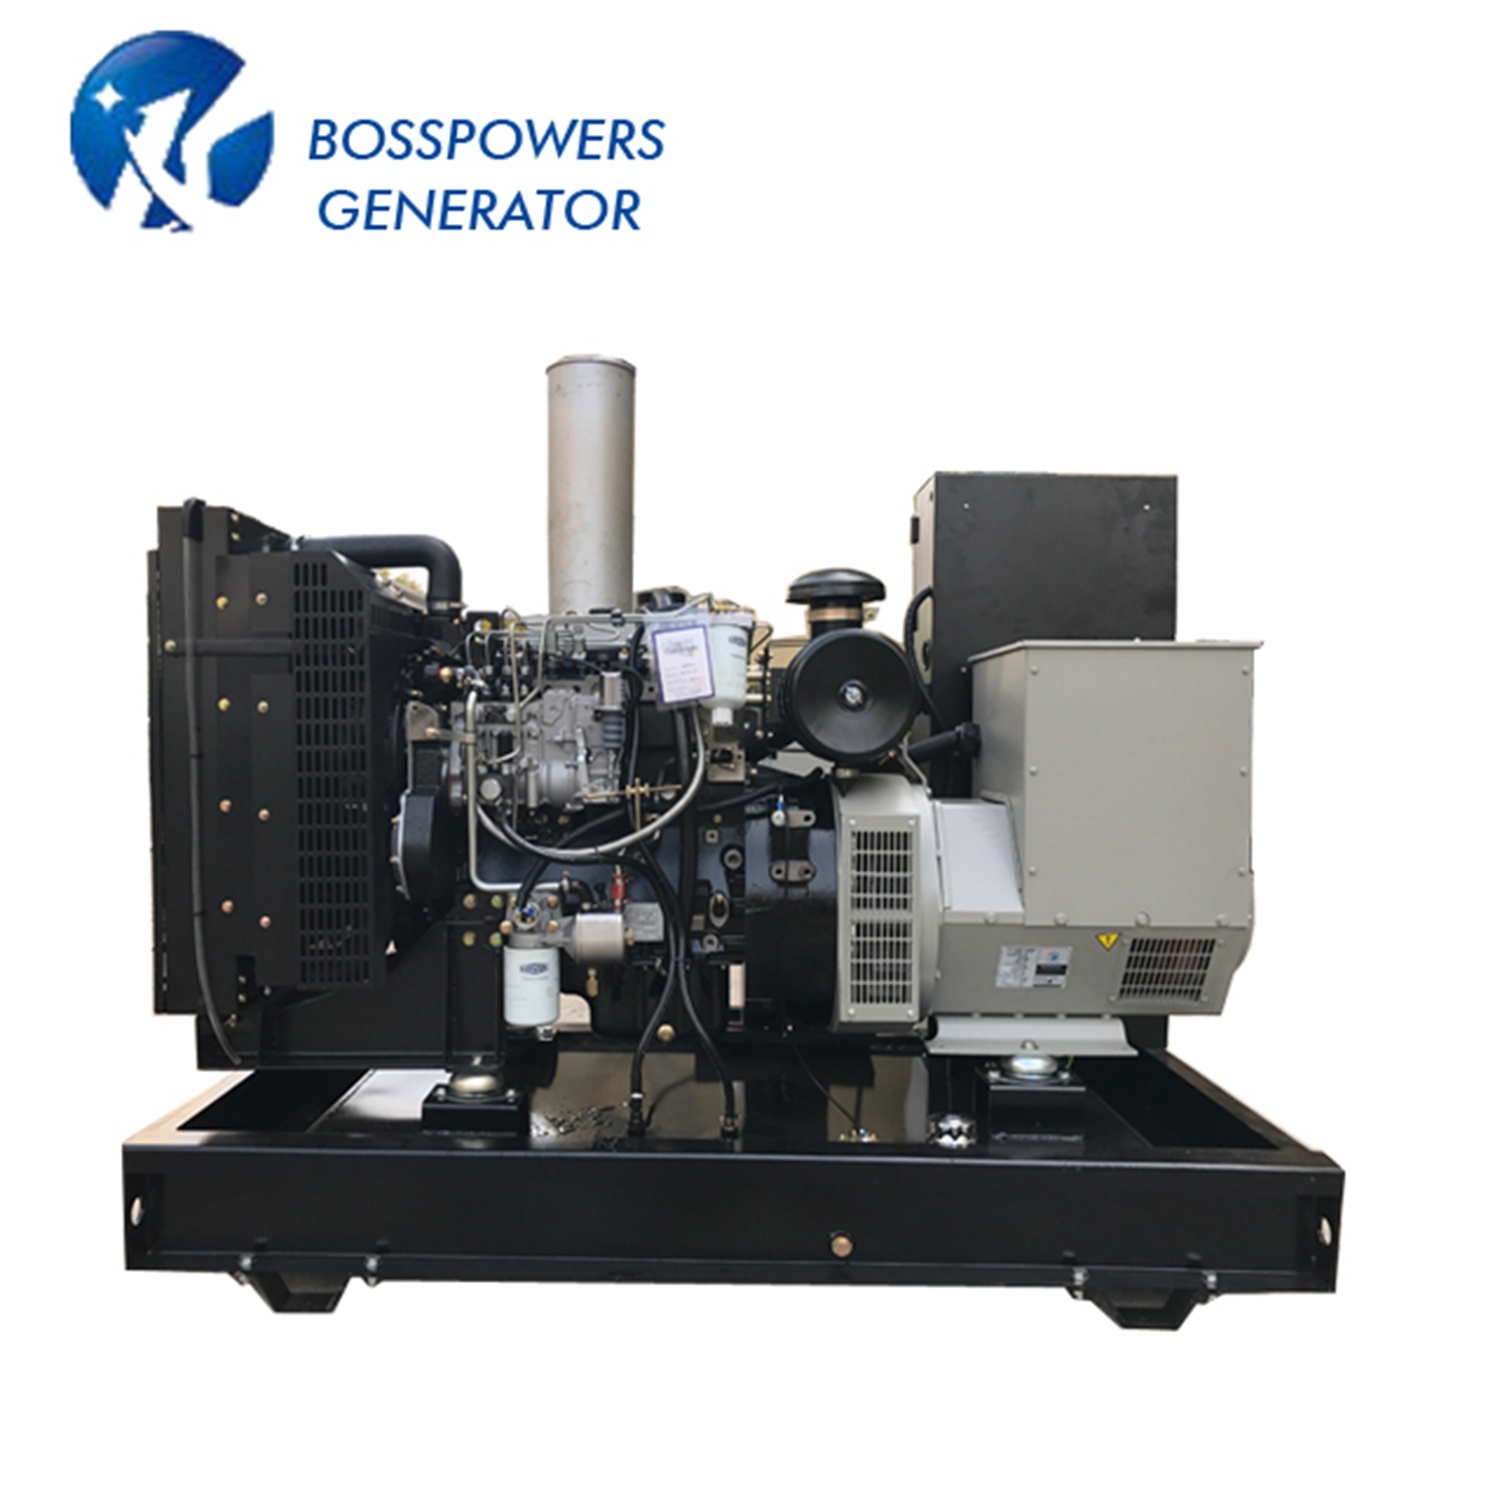 Containerized Diesel Generator Set Backup Use Powered by Kpv970